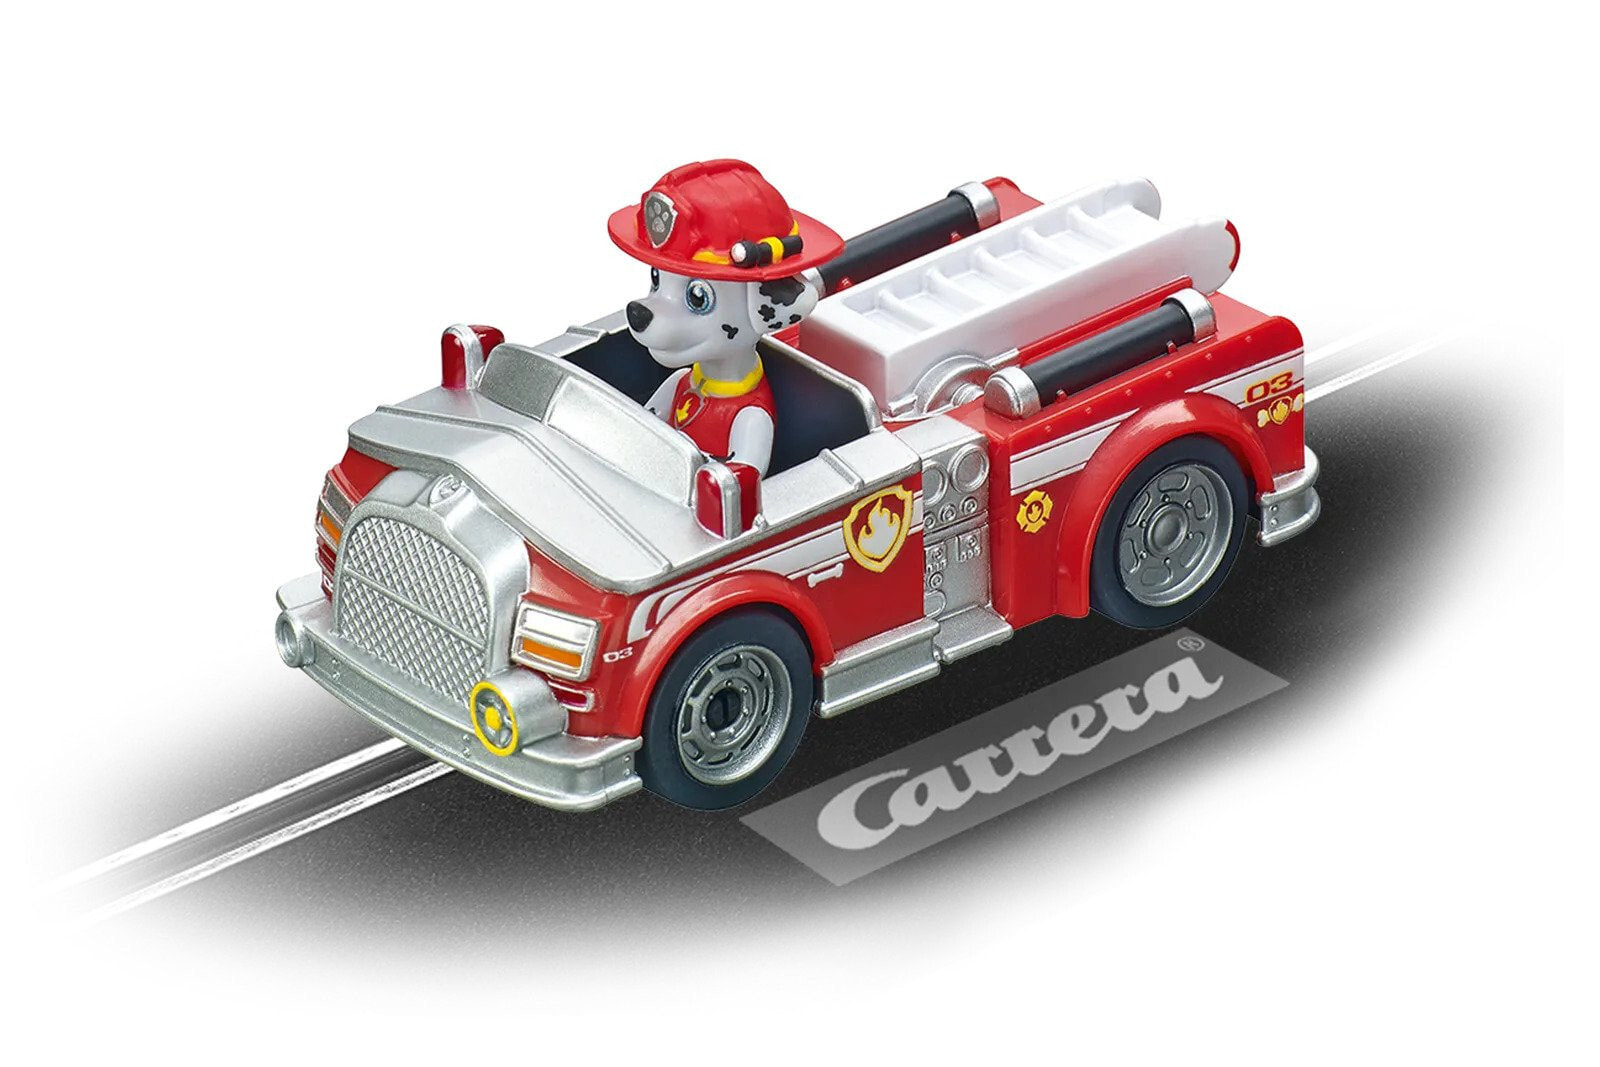 Paw Patrol - Marshall - Car - Paw Patrol - Indoor/outdoor - 8 yr(s) - Red - White